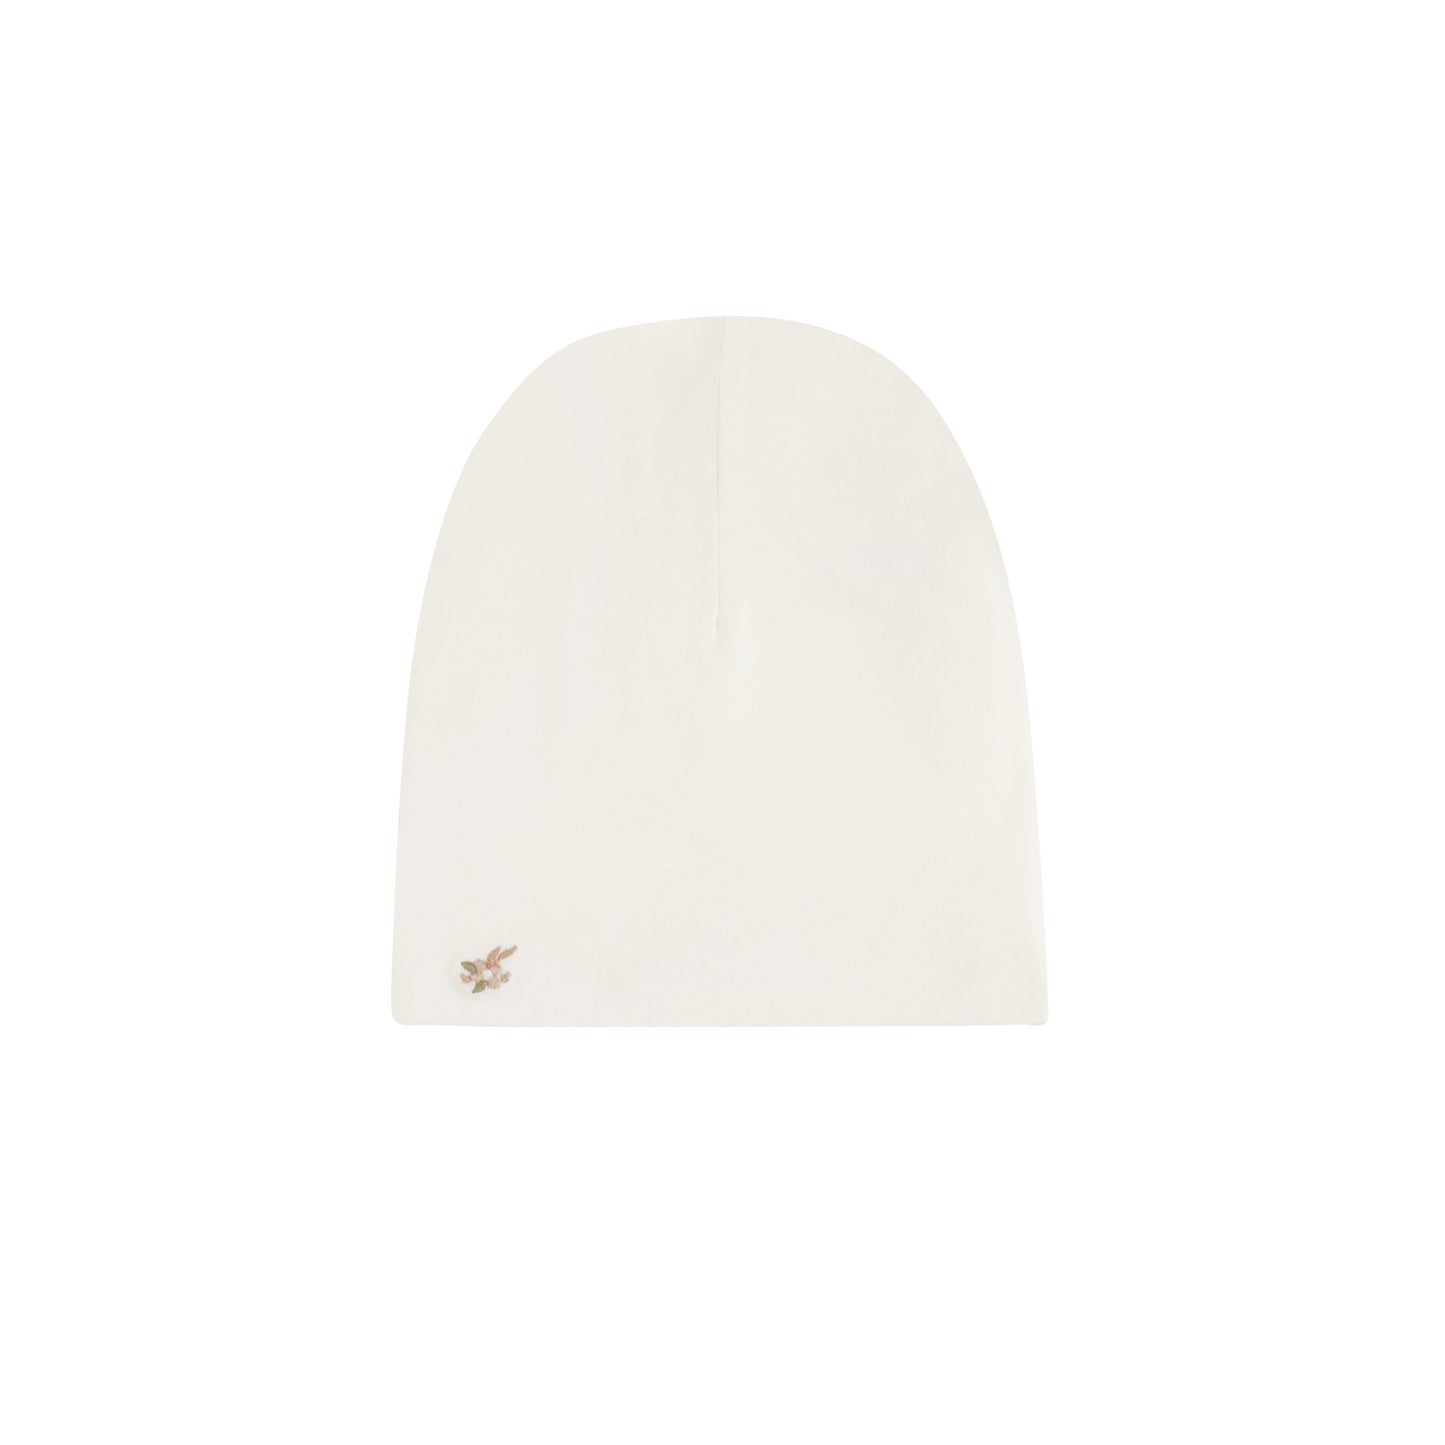 ELY'S & CO. IVORY RIBBED EMBROIDERED FLOWER BEANIE